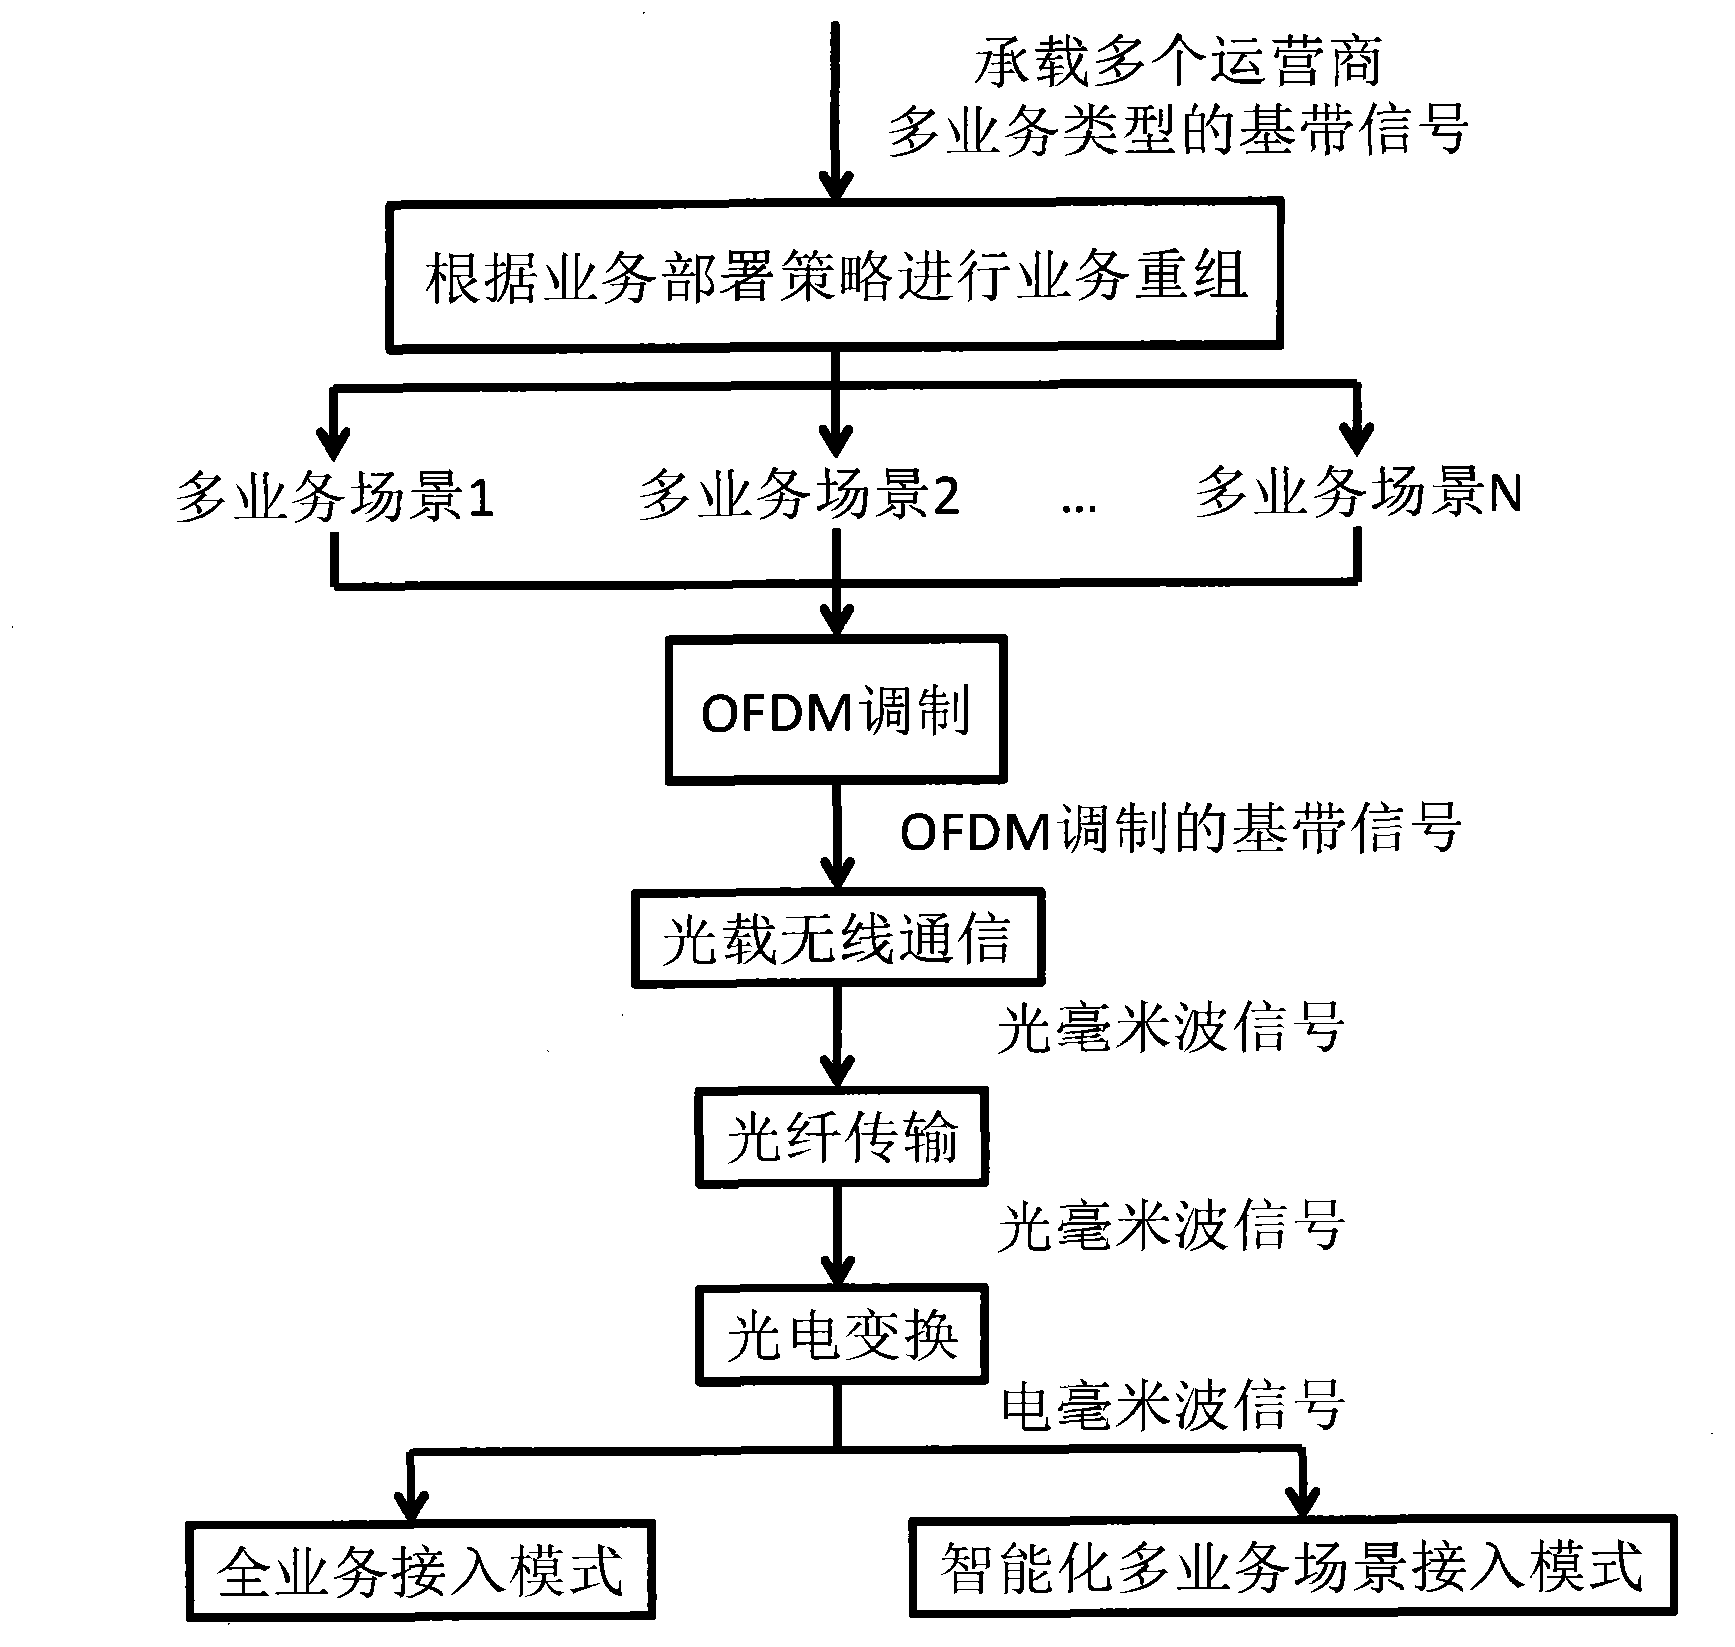 Method and system for supporting multi-service intelligent access based on radio over fiber technology